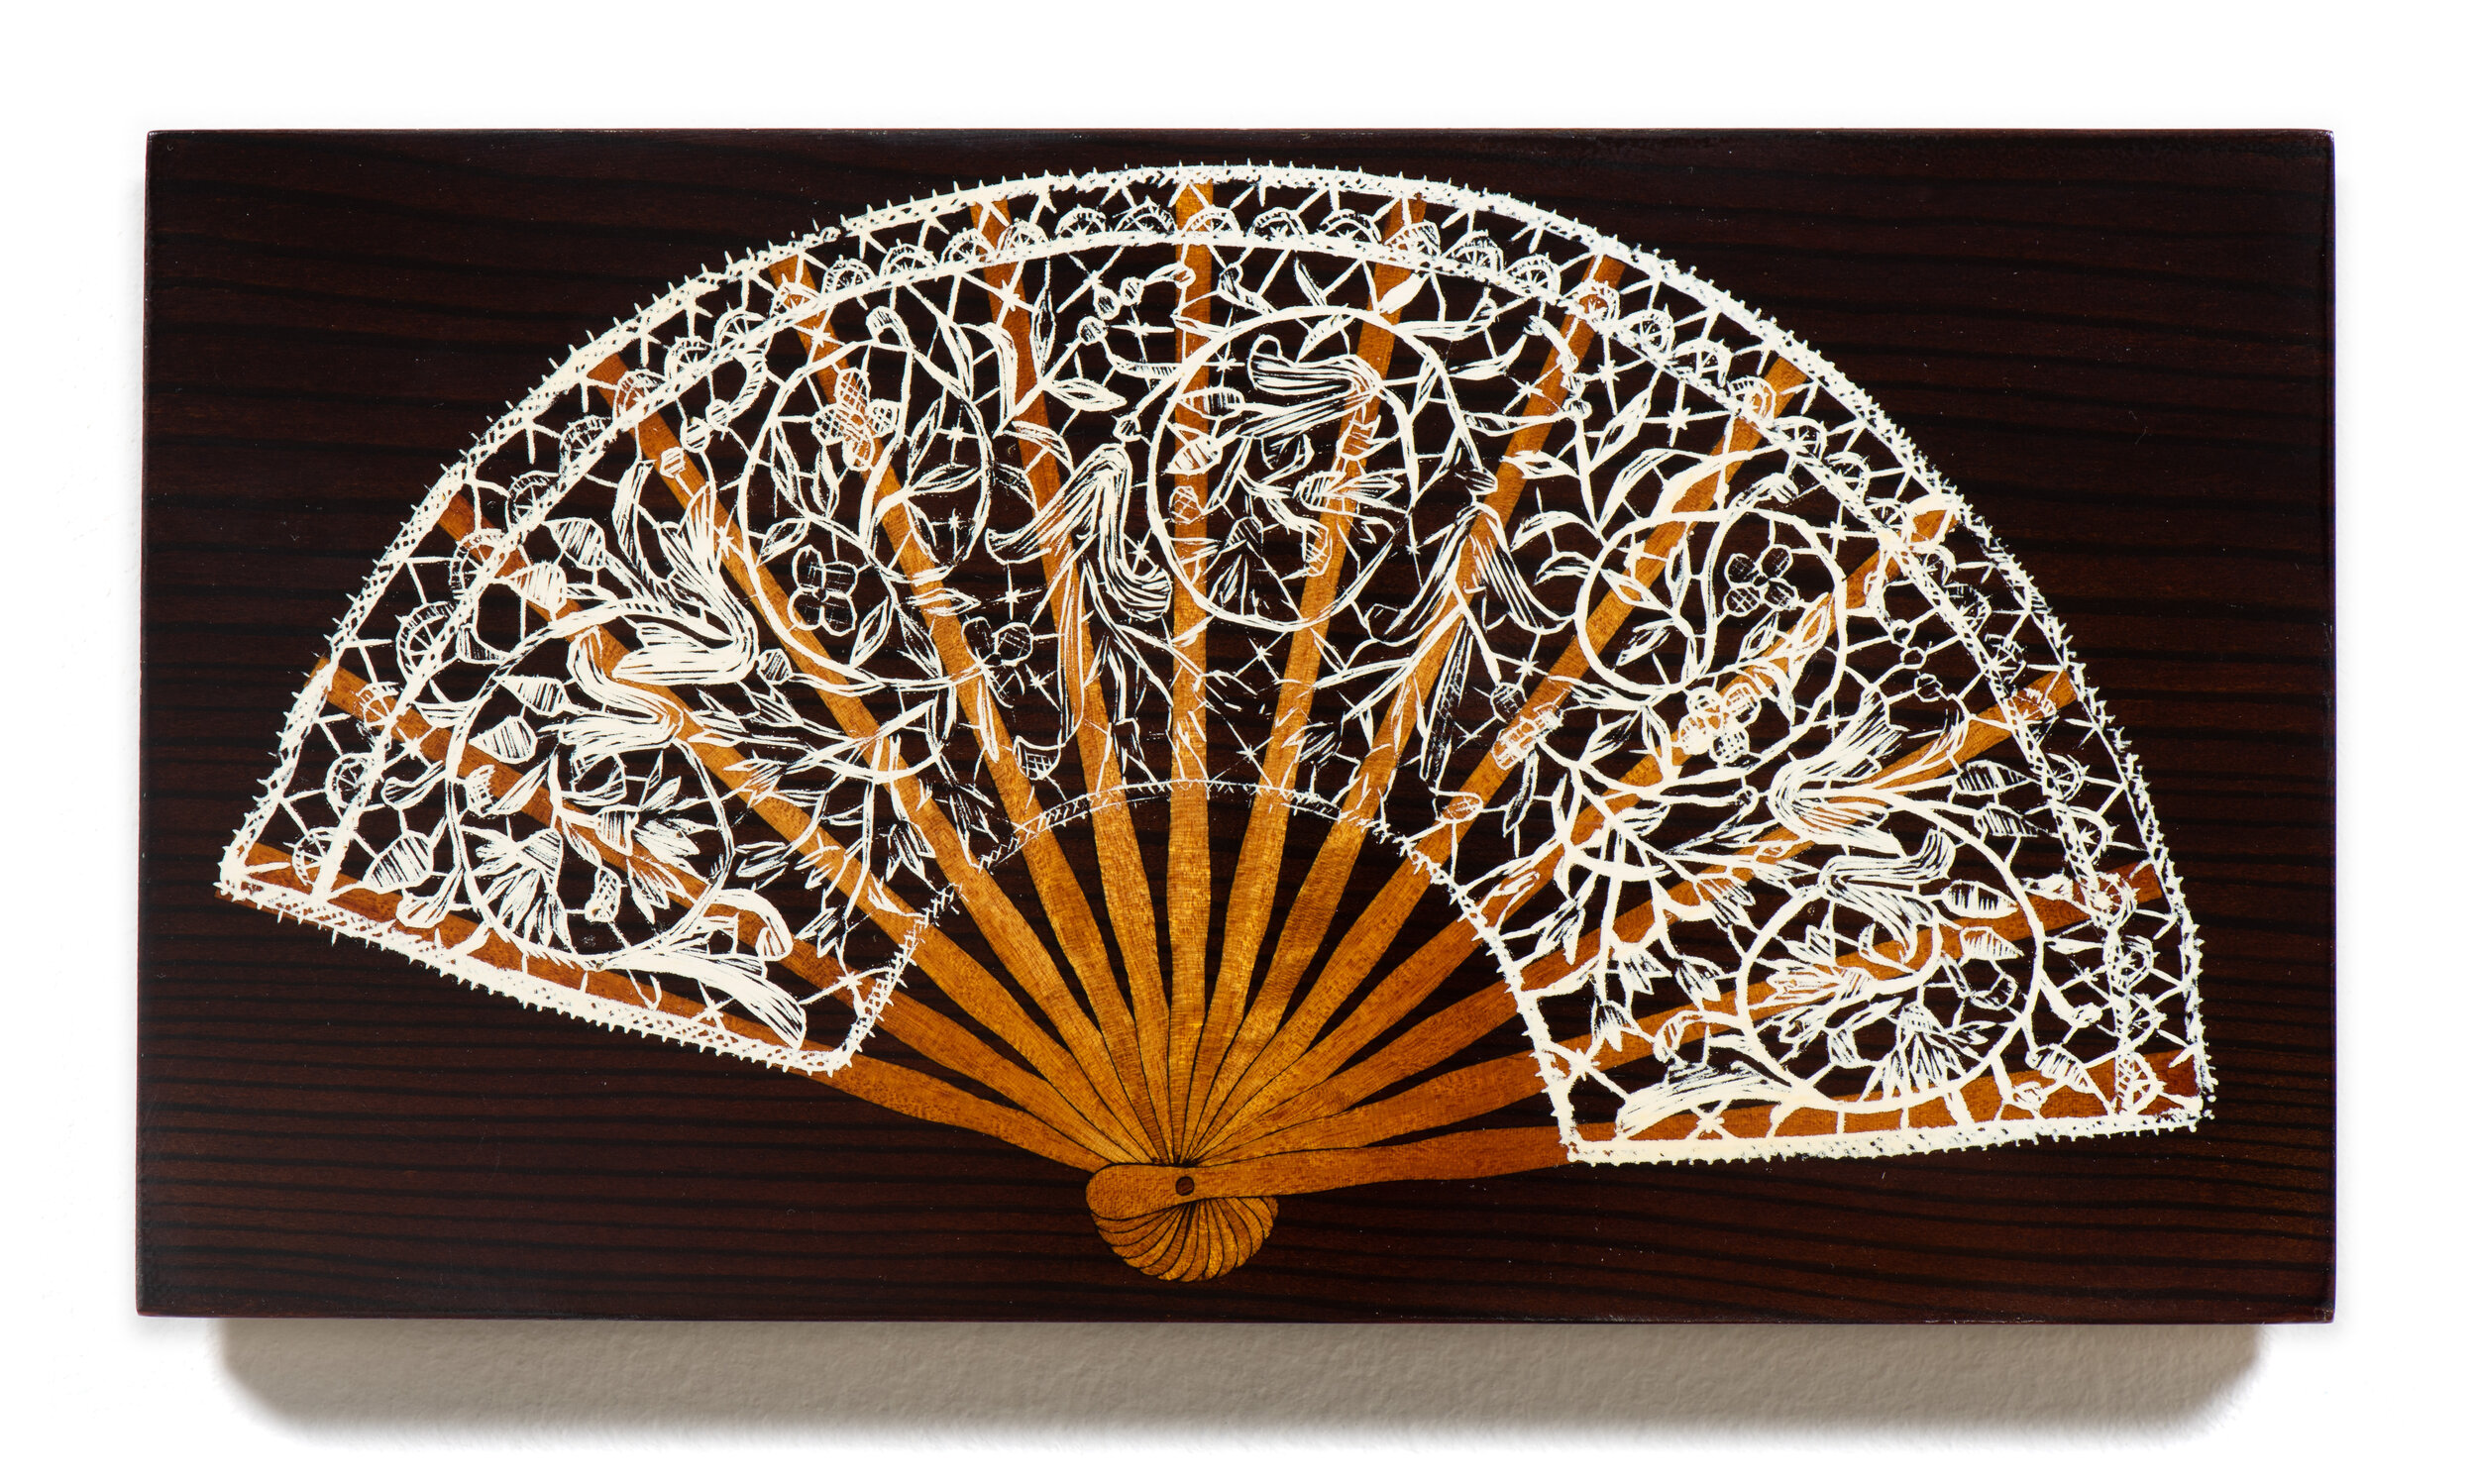   Burano Fan , 2021 Wood and shellac 4 1/2 x 8 1/4 x 1/2 inches&nbsp; 